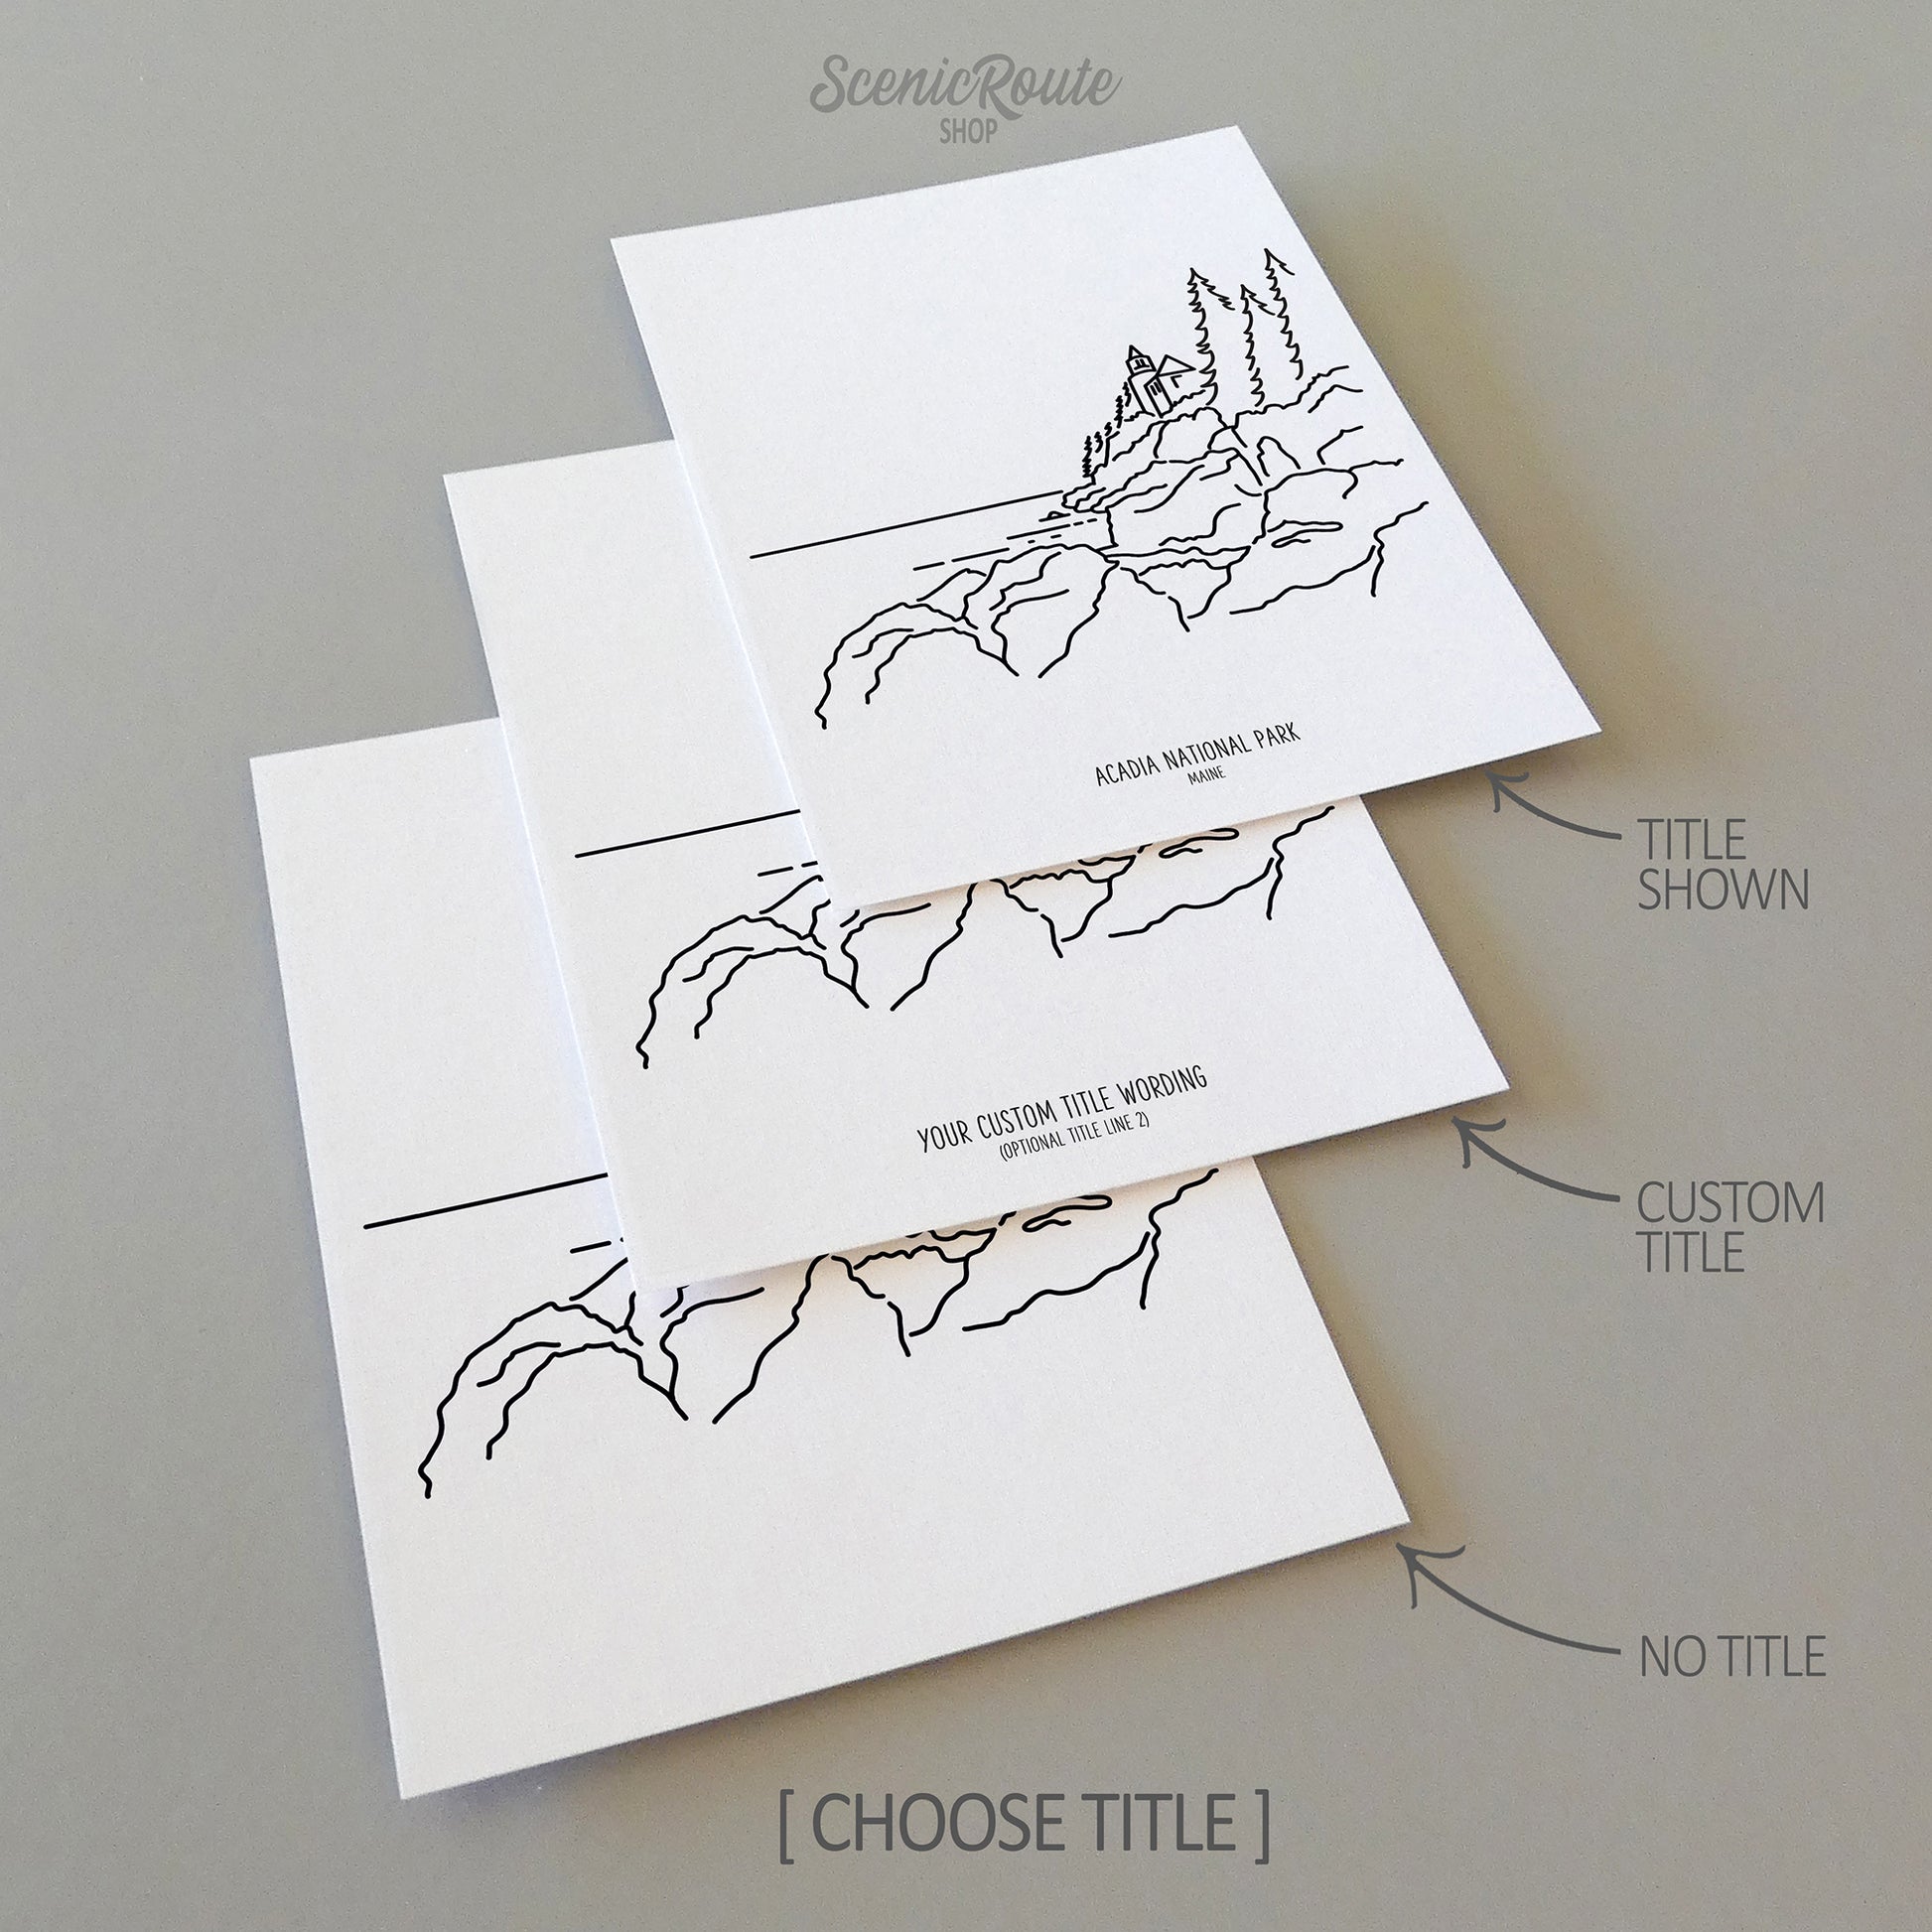 Three line art drawings of Acadia National Park on white linen paper with a gray background. The pieces are shown with title options that can be chosen and personalized.